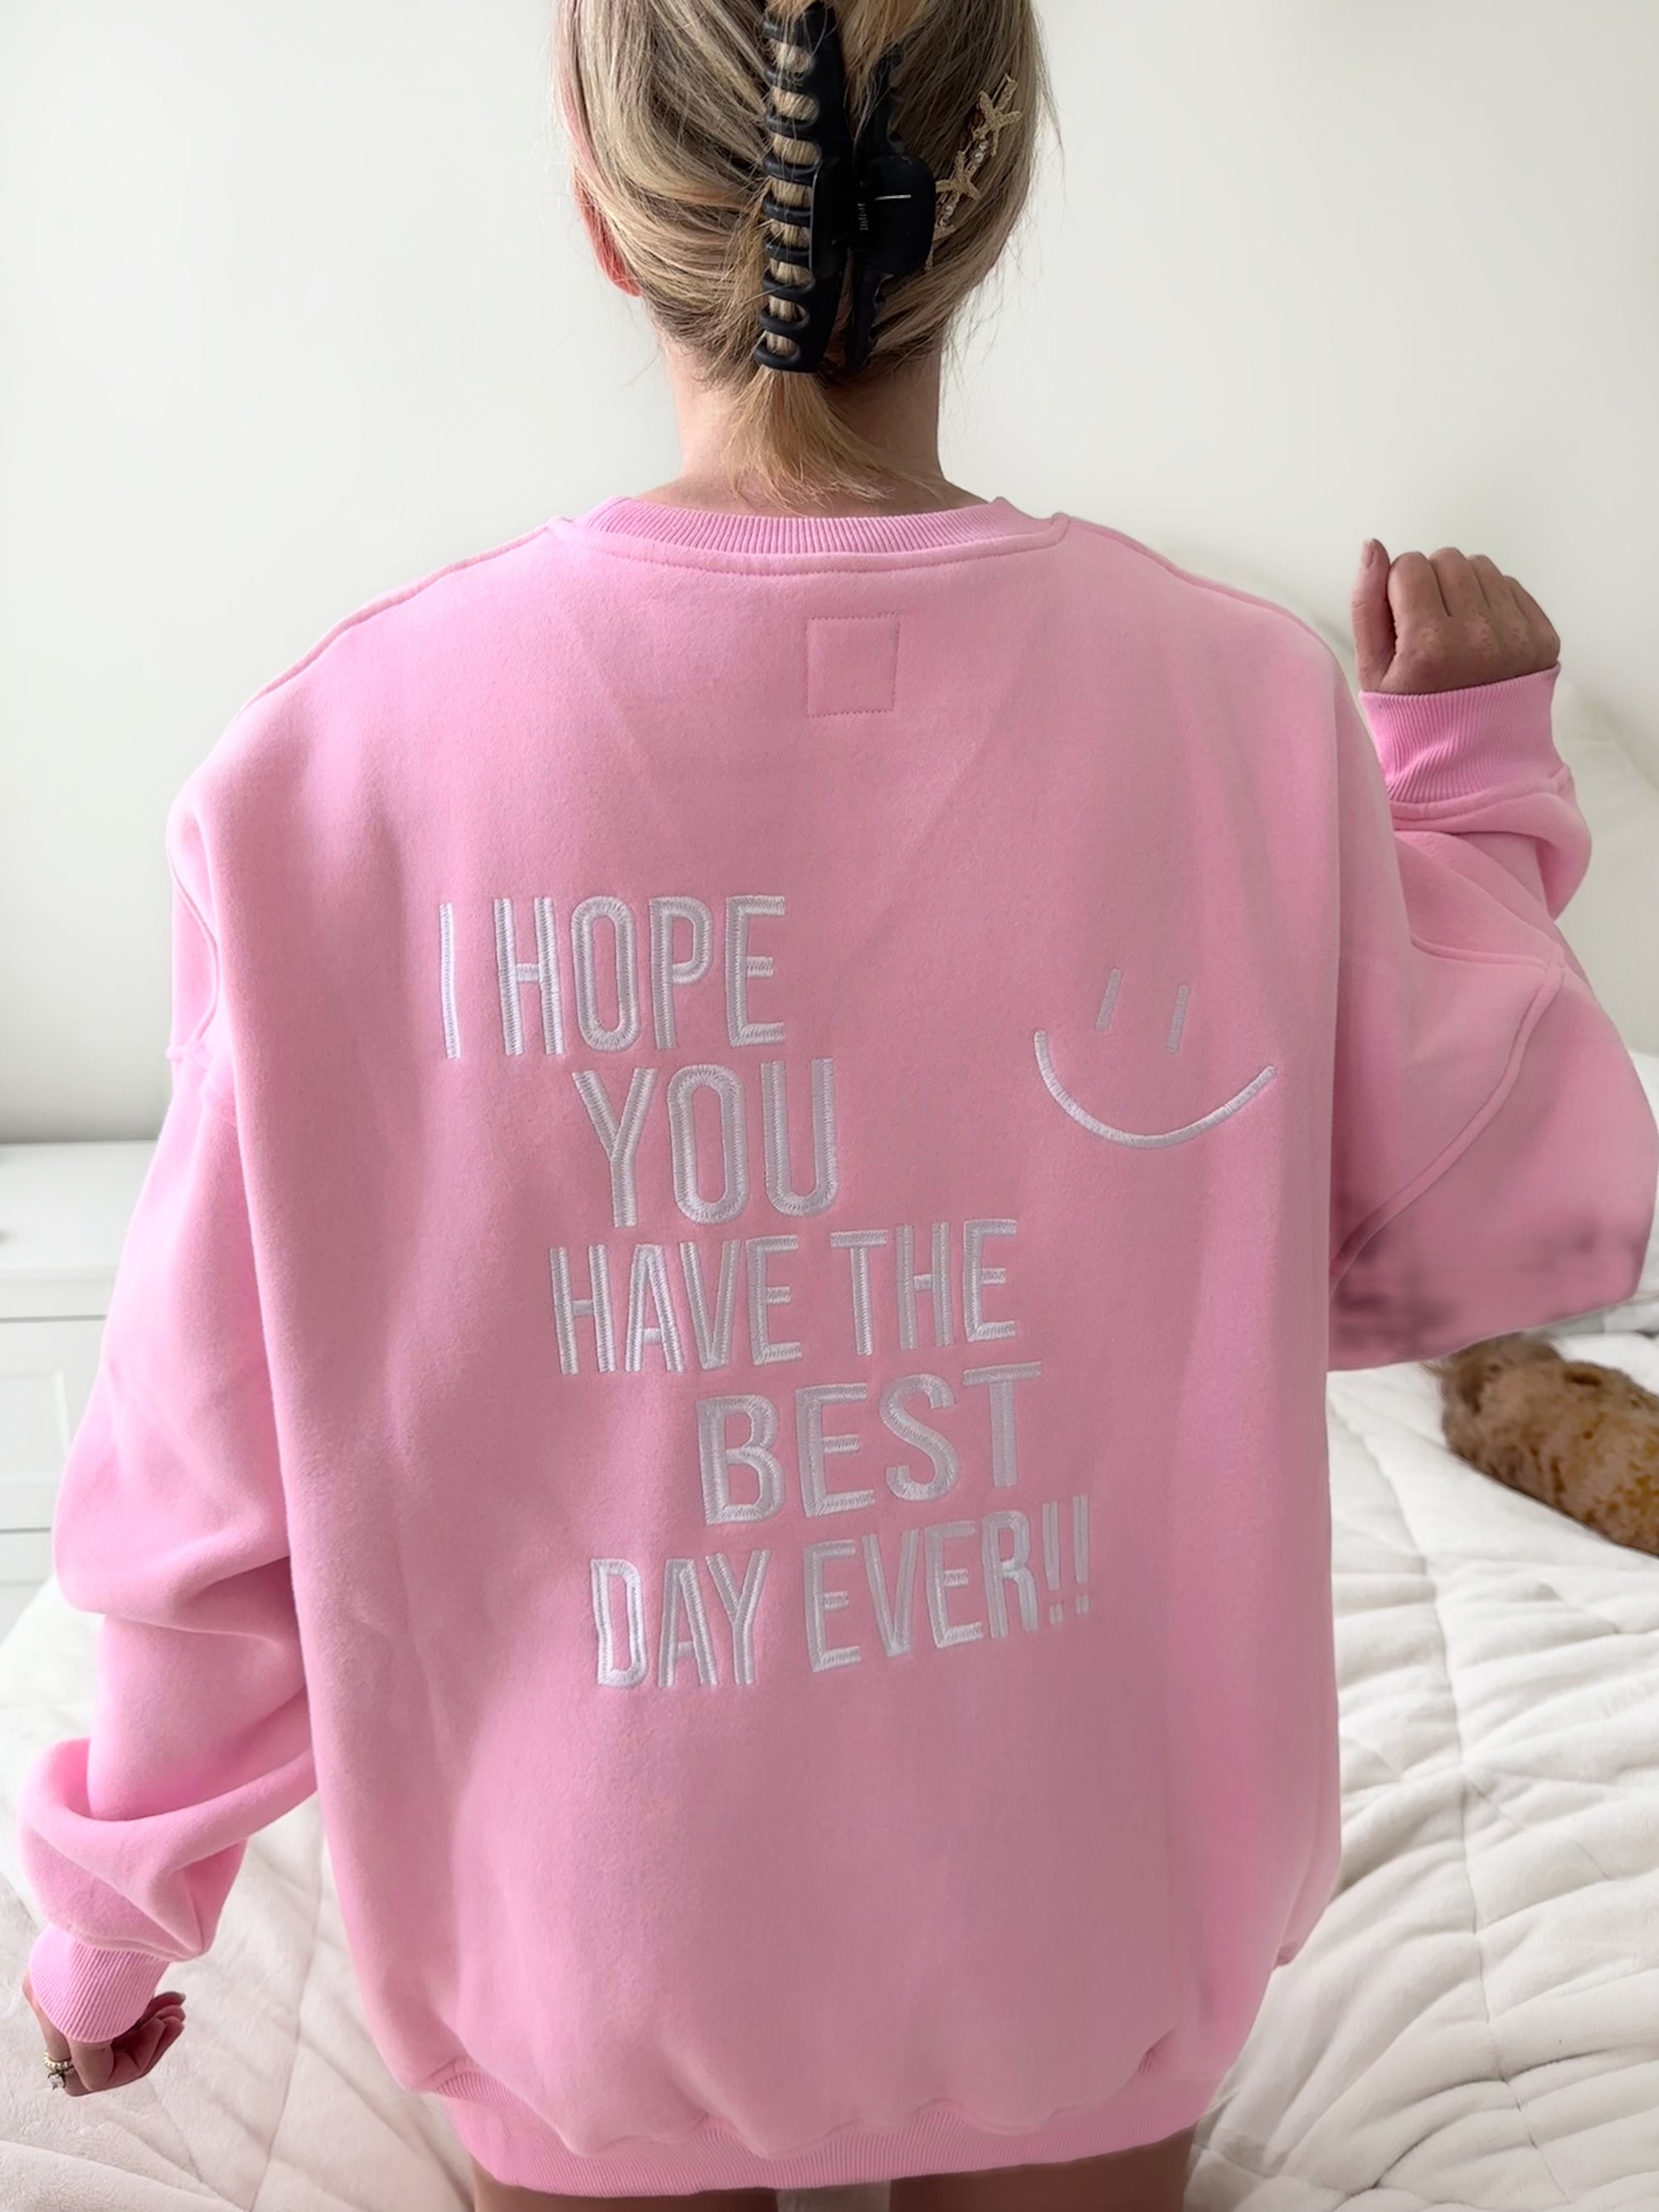 I HOPE YOU HAVE THE BEST DAY EVER EMBROIDER SWEATSHIRT - Sunkissedcoconut